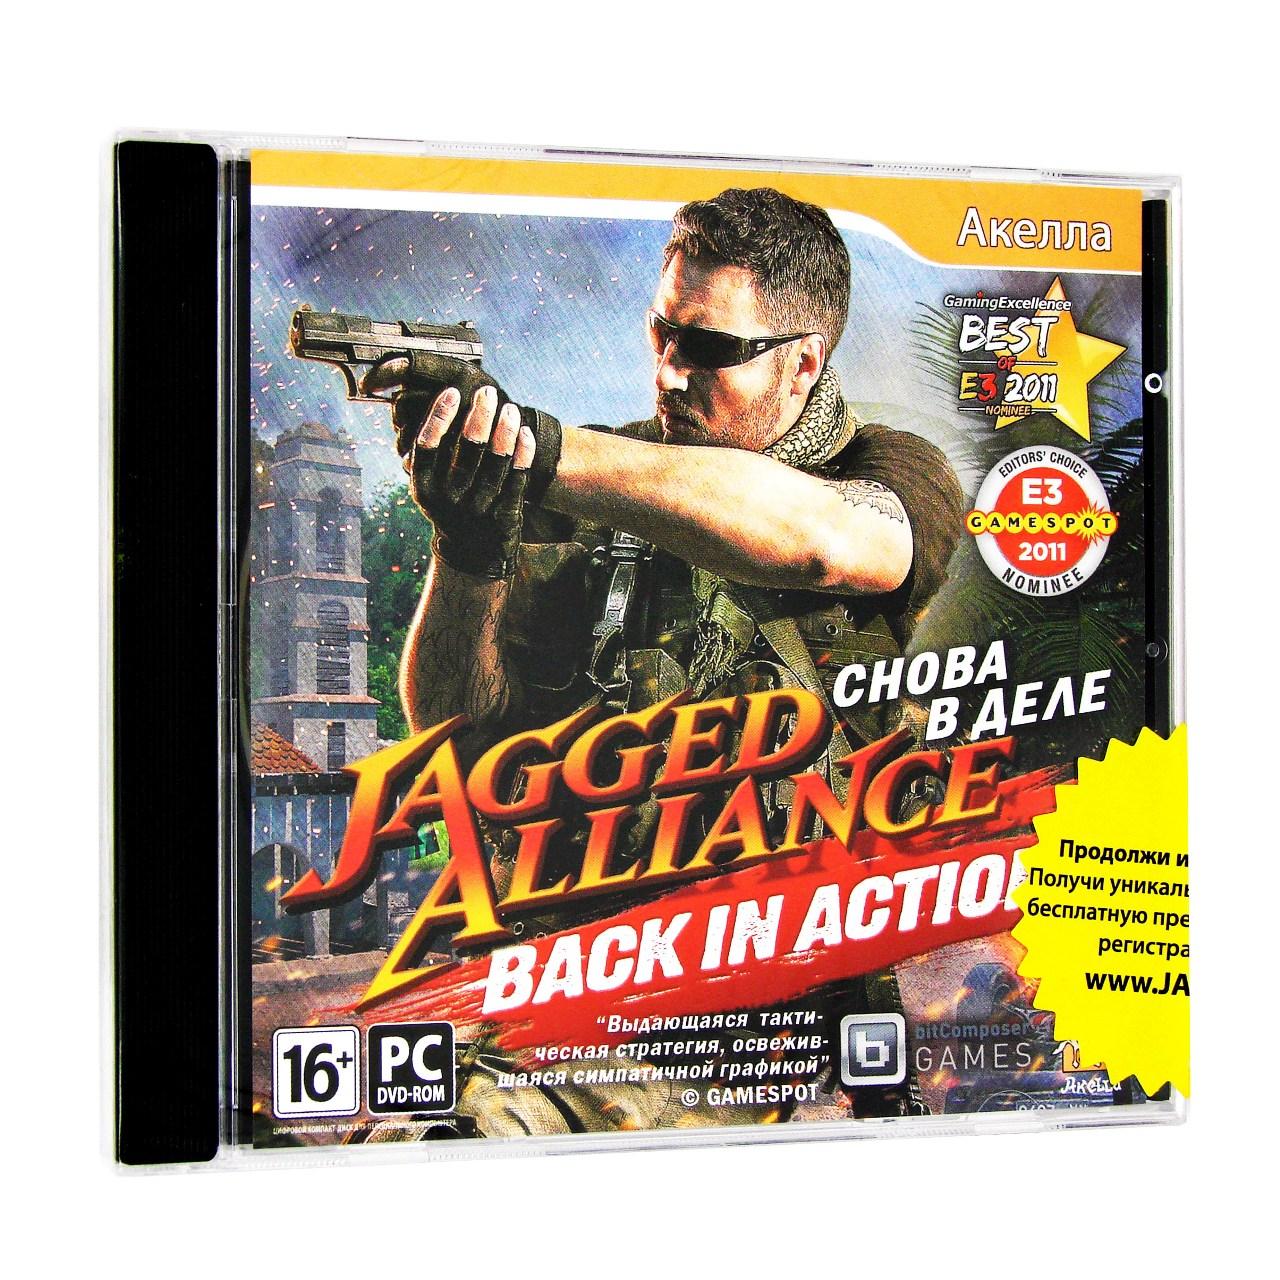  - Jagged Alliance: Back in action (  ) (),  "", 1DVD